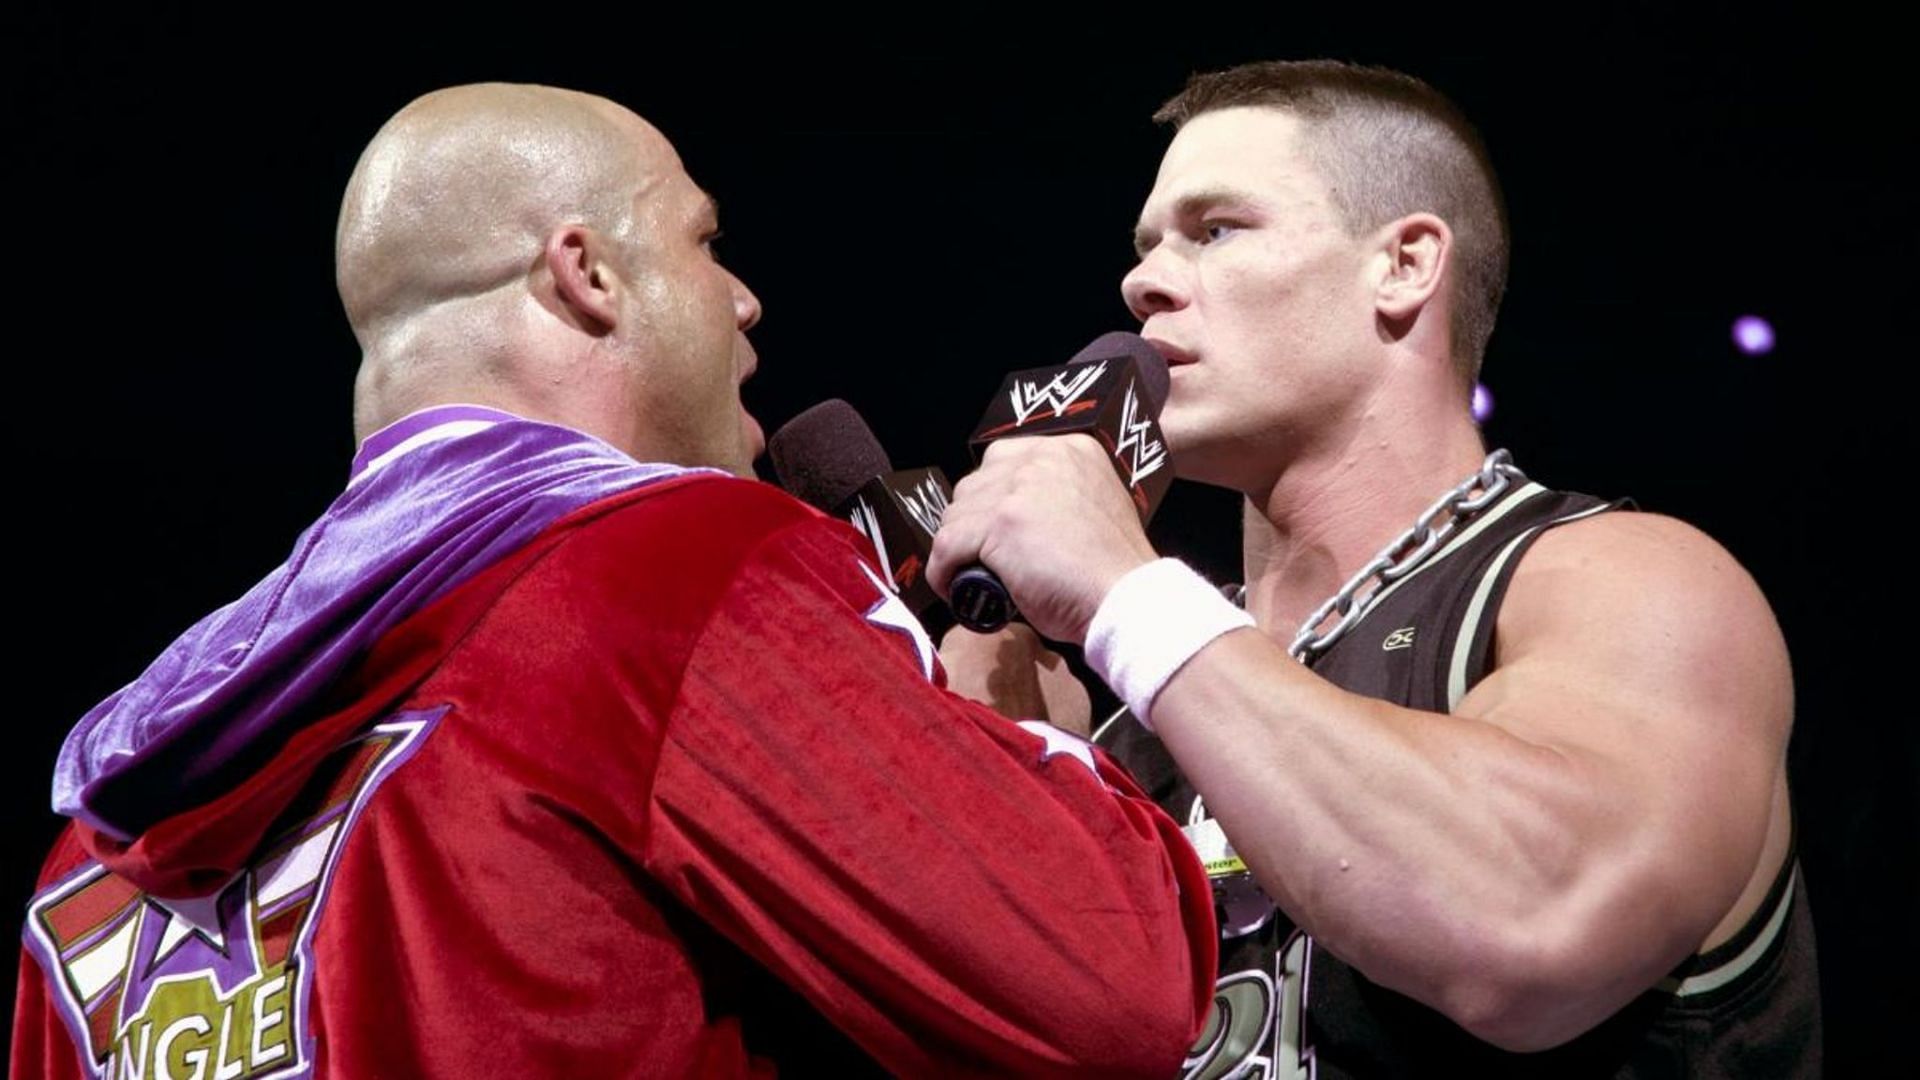 Cena&#039;s first match was against Angle, where Cena announced he had &quot;Ruthless Aggression.&quot;